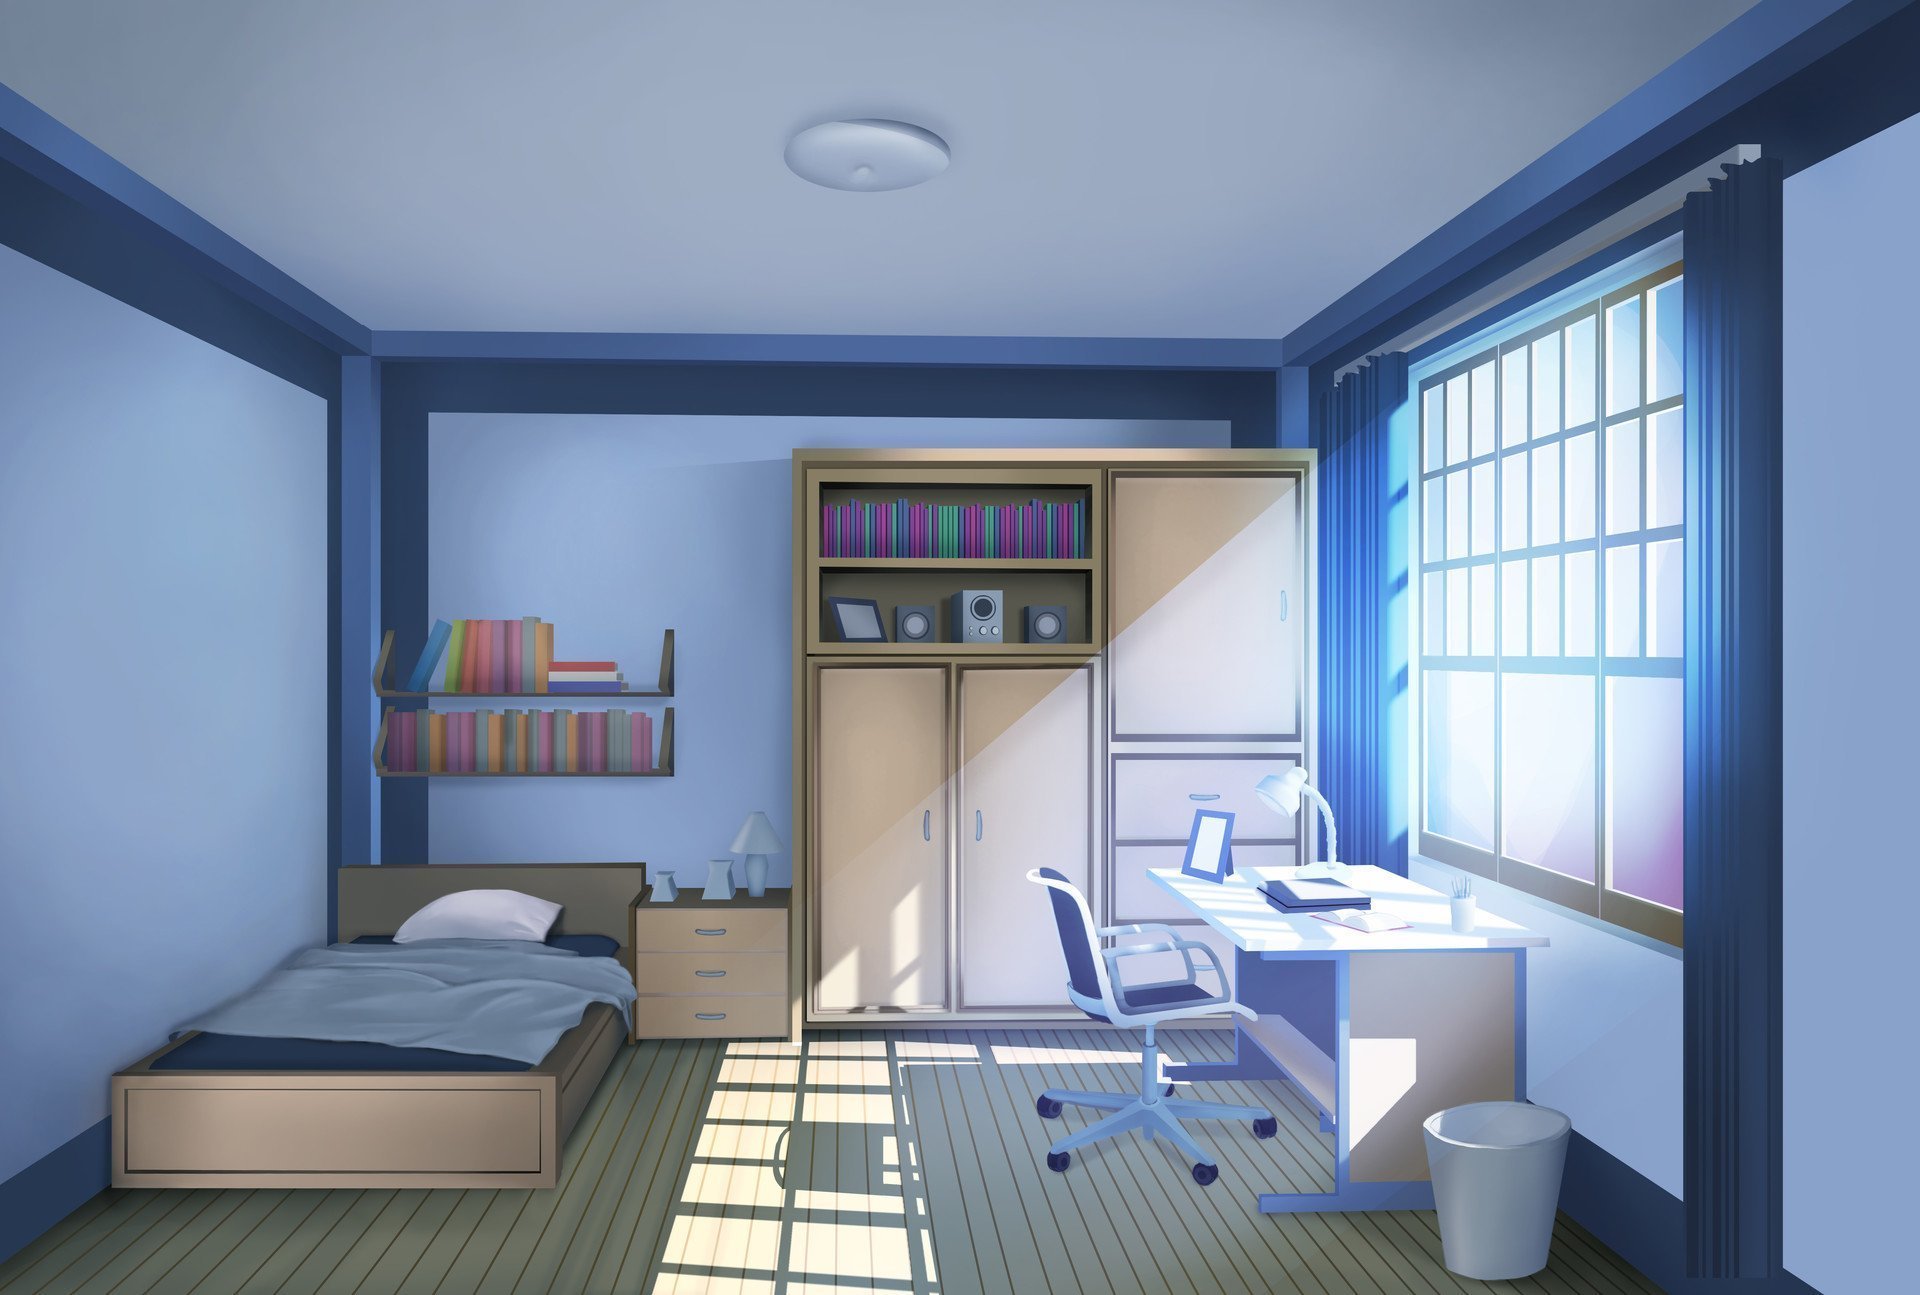 prompthunt: interior of a cute bedroom, posters, pastel colors, anime  artstyle, anime key visual , wide angle shot,